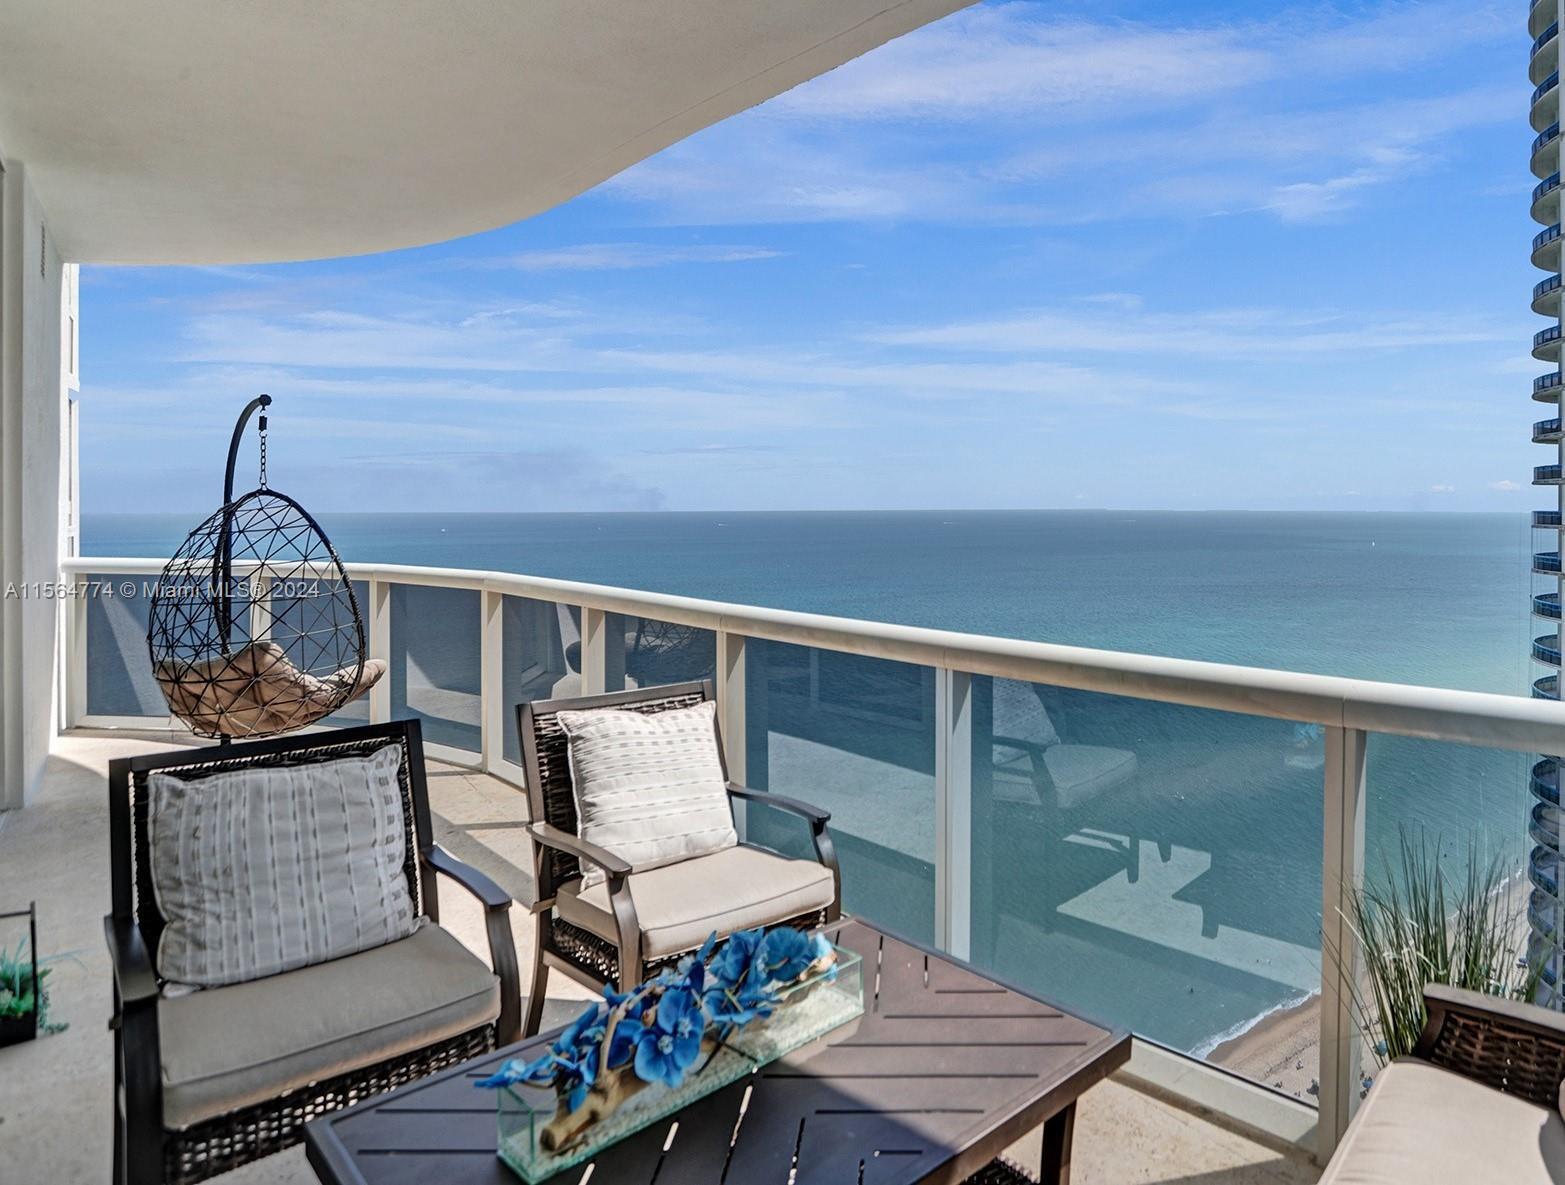 Photo of 15901 Collins Ave #2702 in Sunny Isles Beach, FL